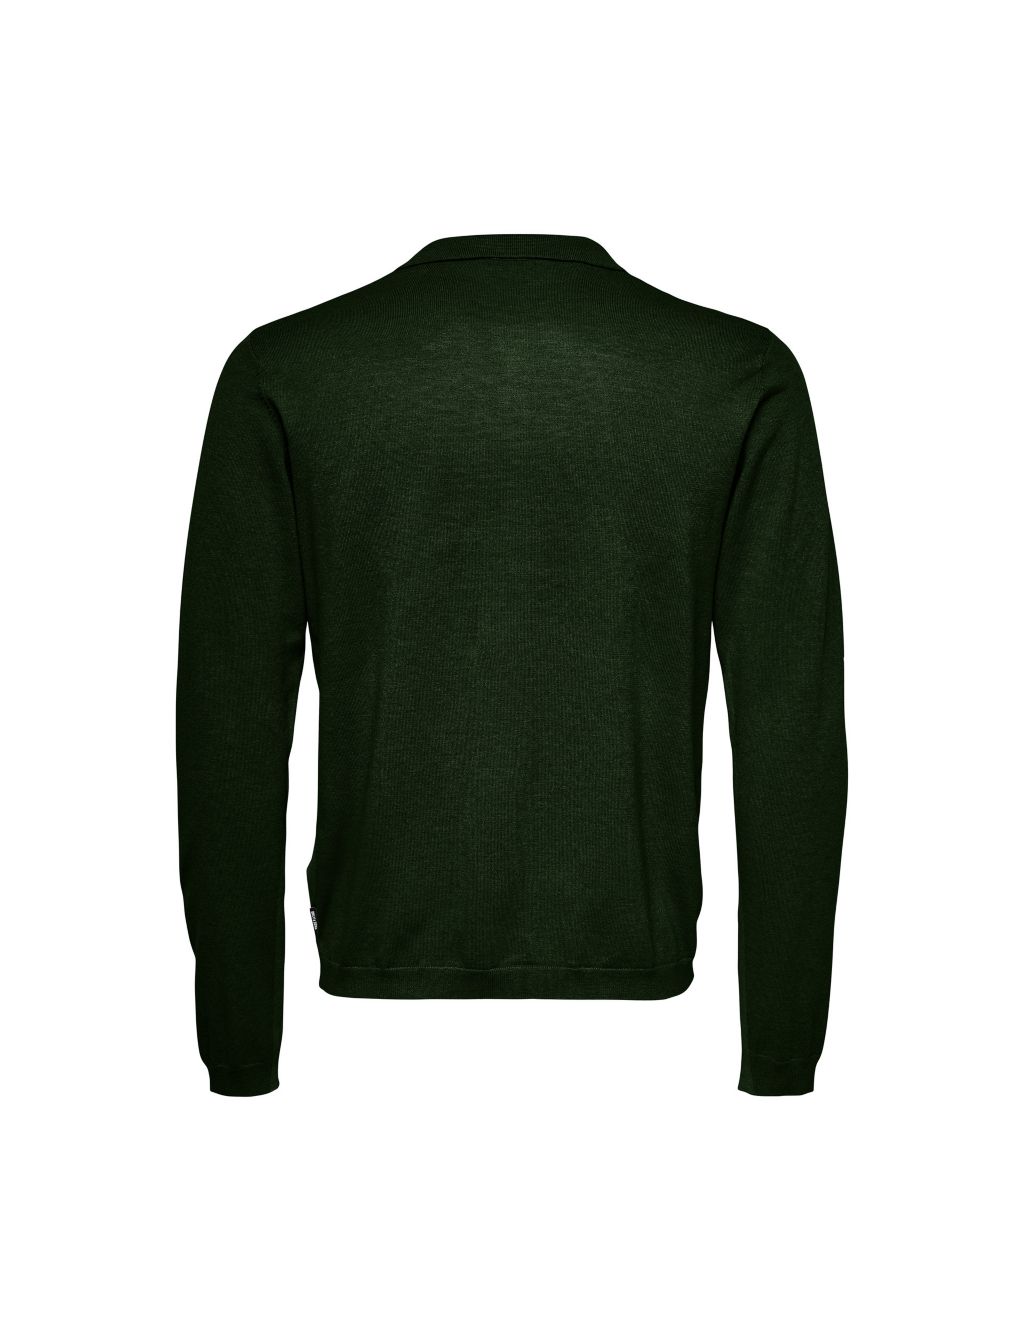 Knitted Polo Shirt image 7